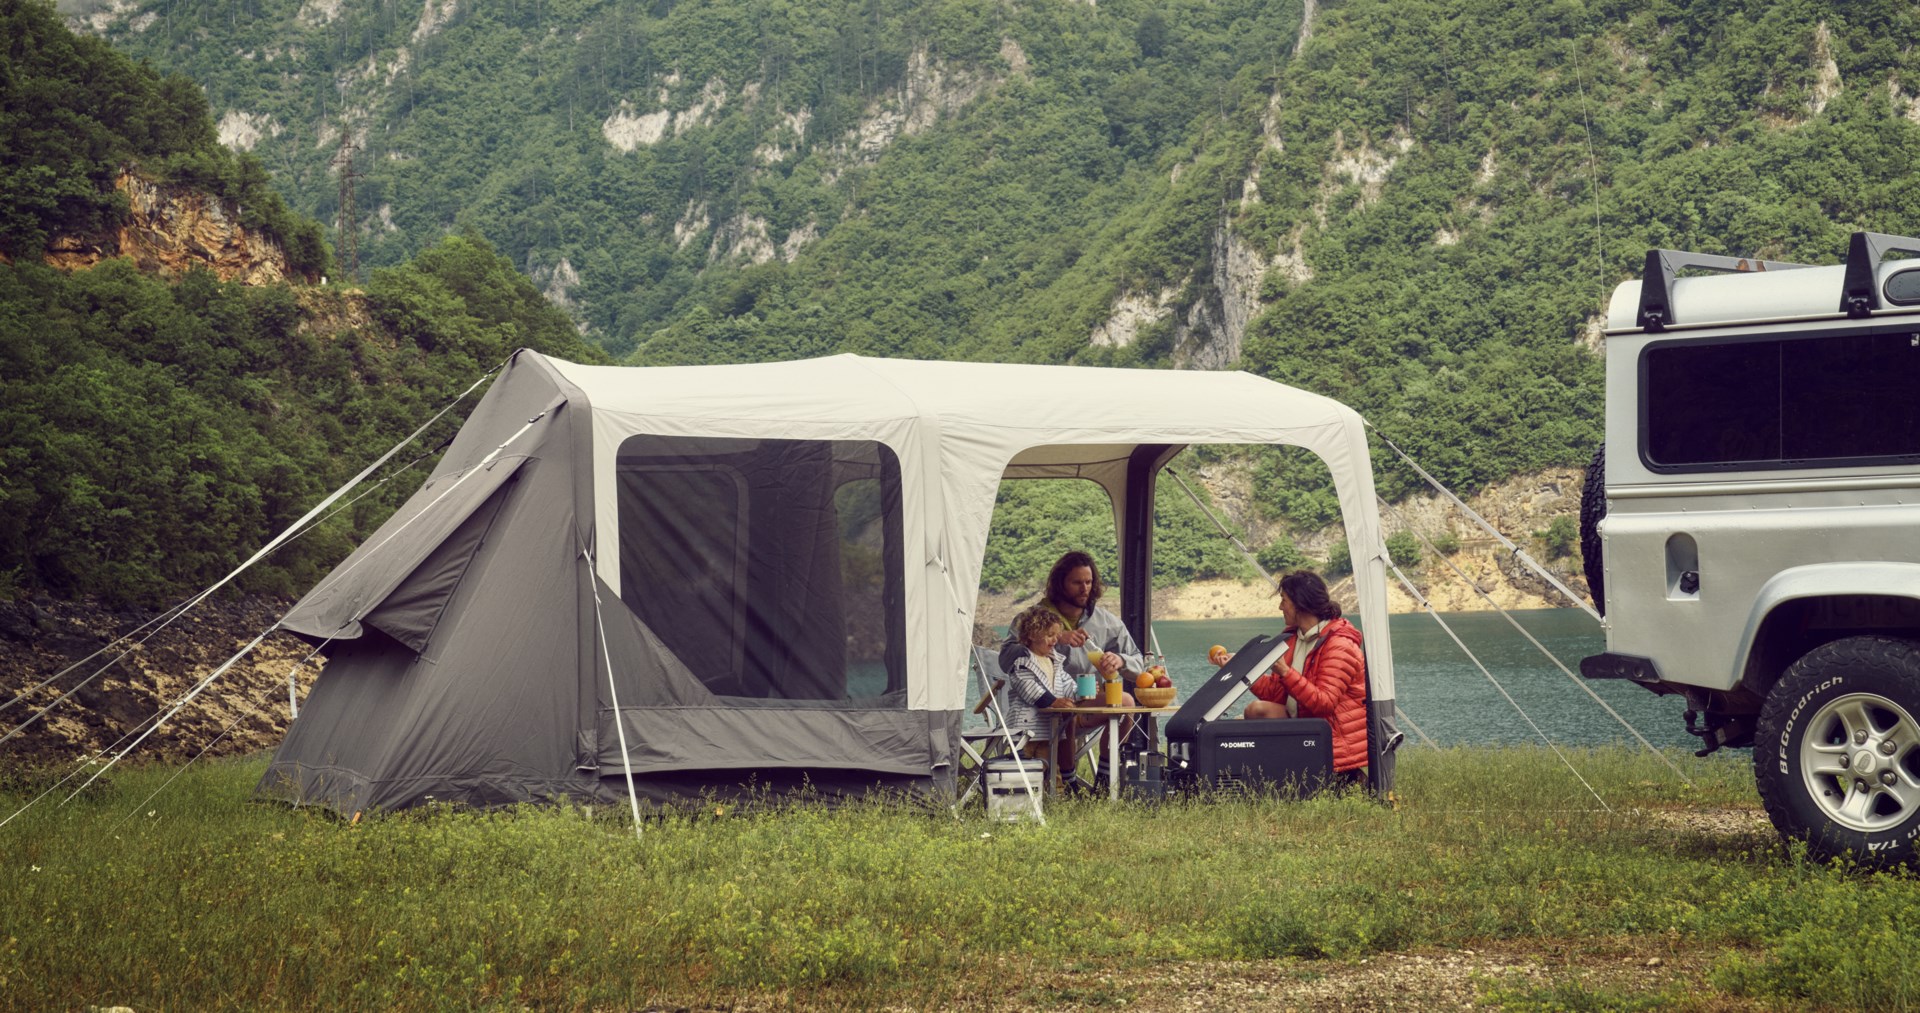 The compact tent series